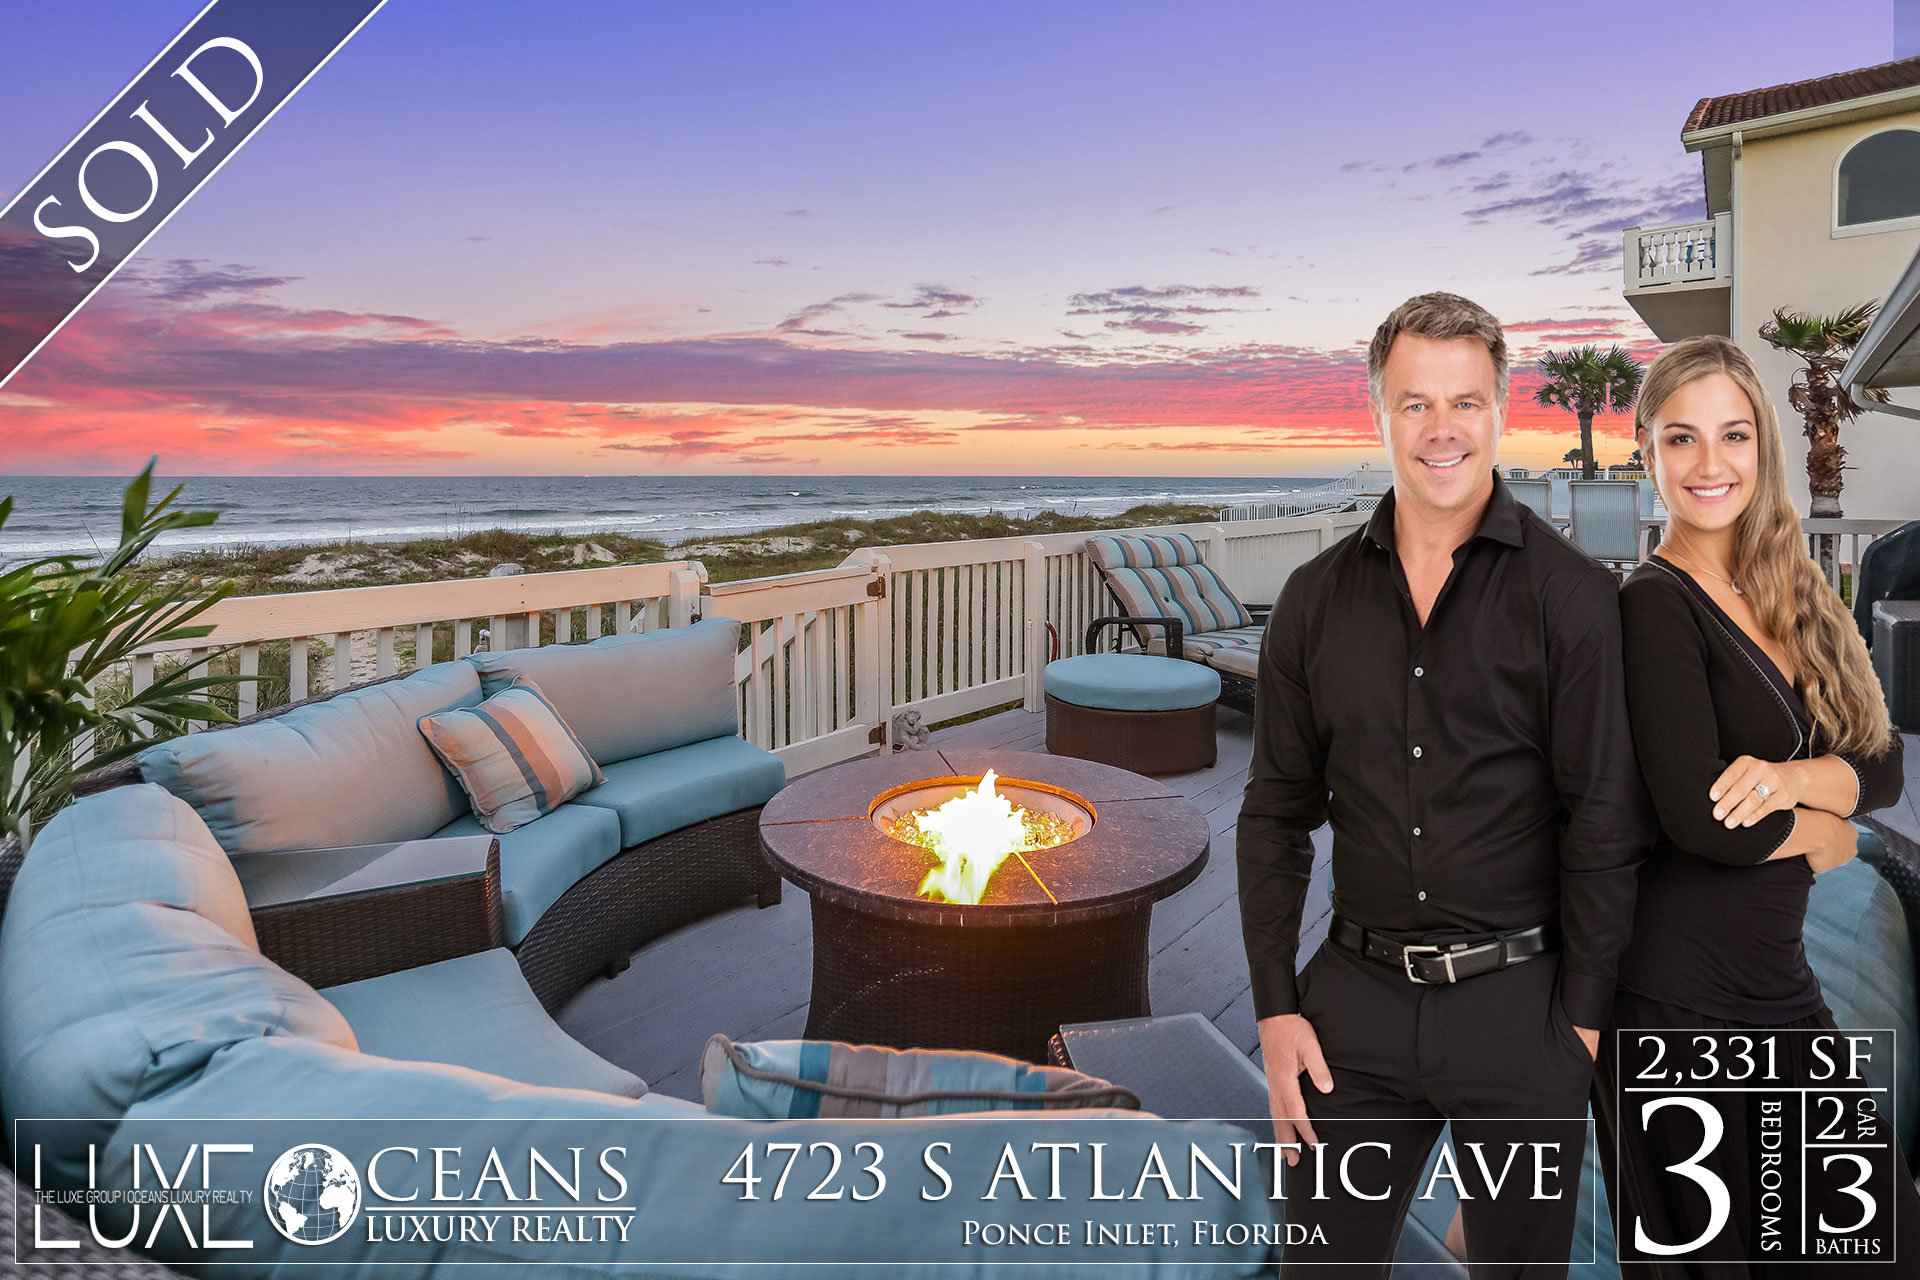 Ponce Inlet Oceanfront Homes For Sale- Sold- 4723 S Atlantic Ave Waterfront Homes For Sale